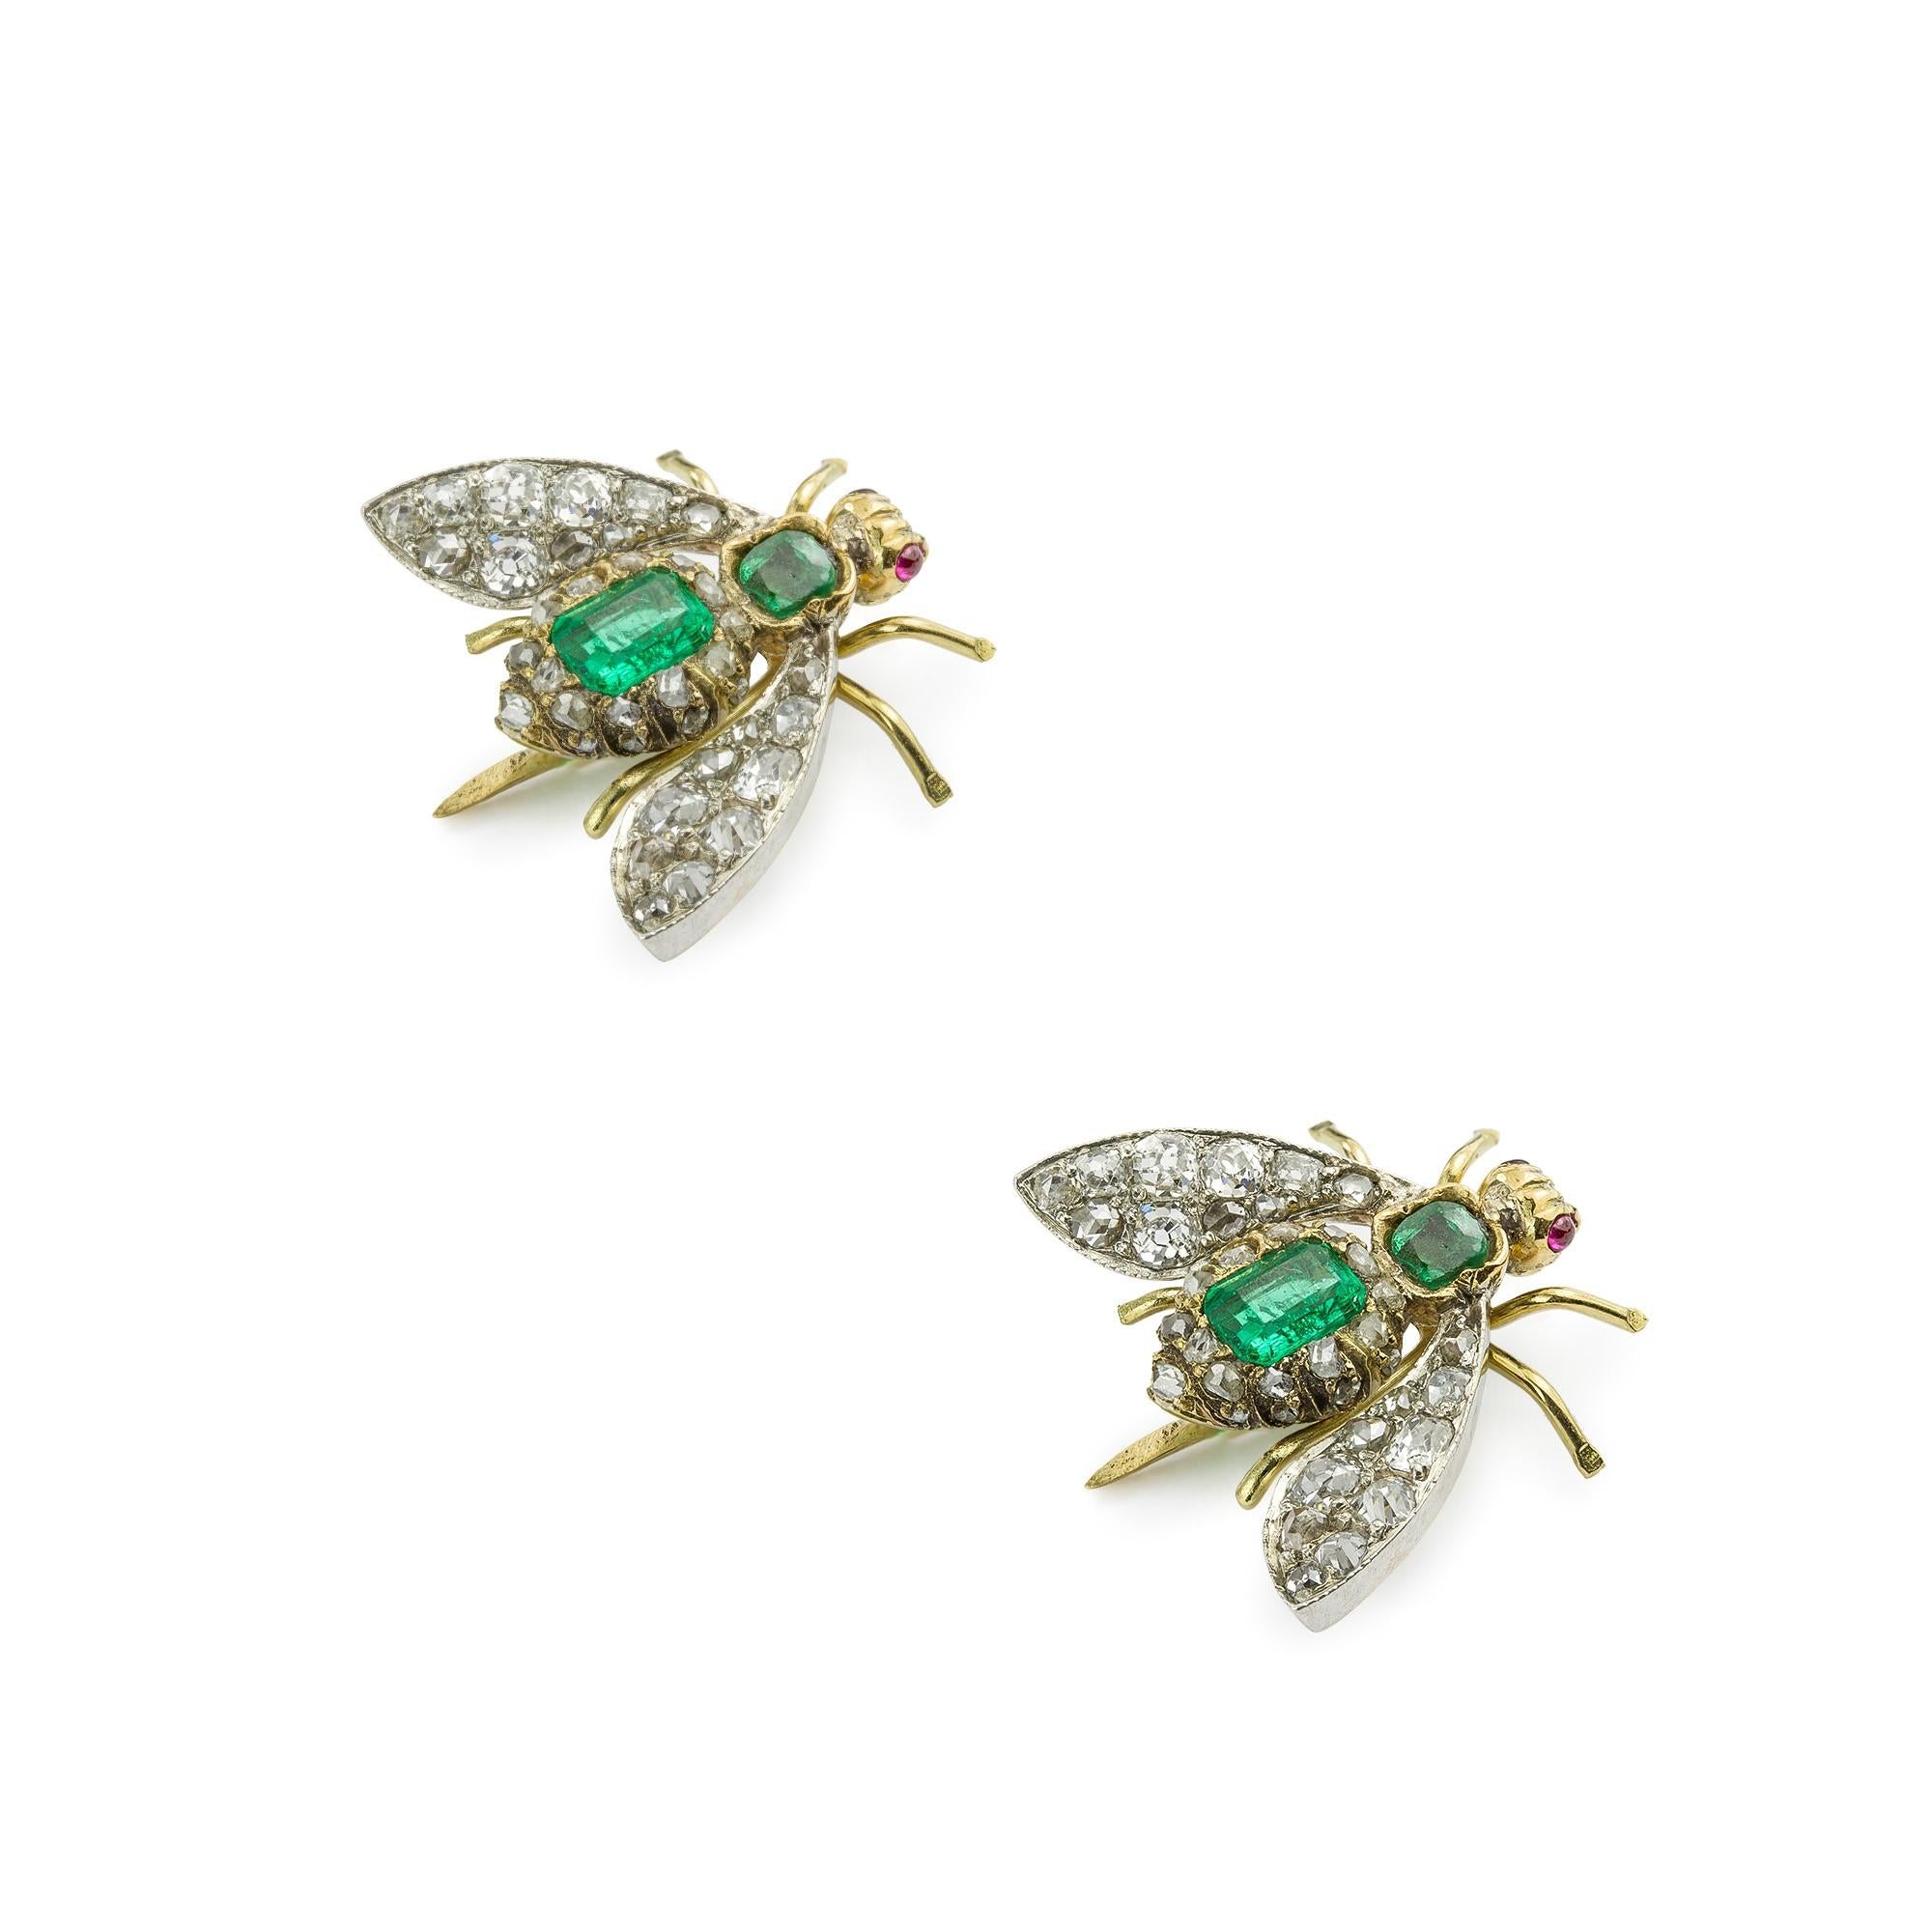 Late Victorian Victorian Emerald and Diamond Fly Scatter-Pin Brooch